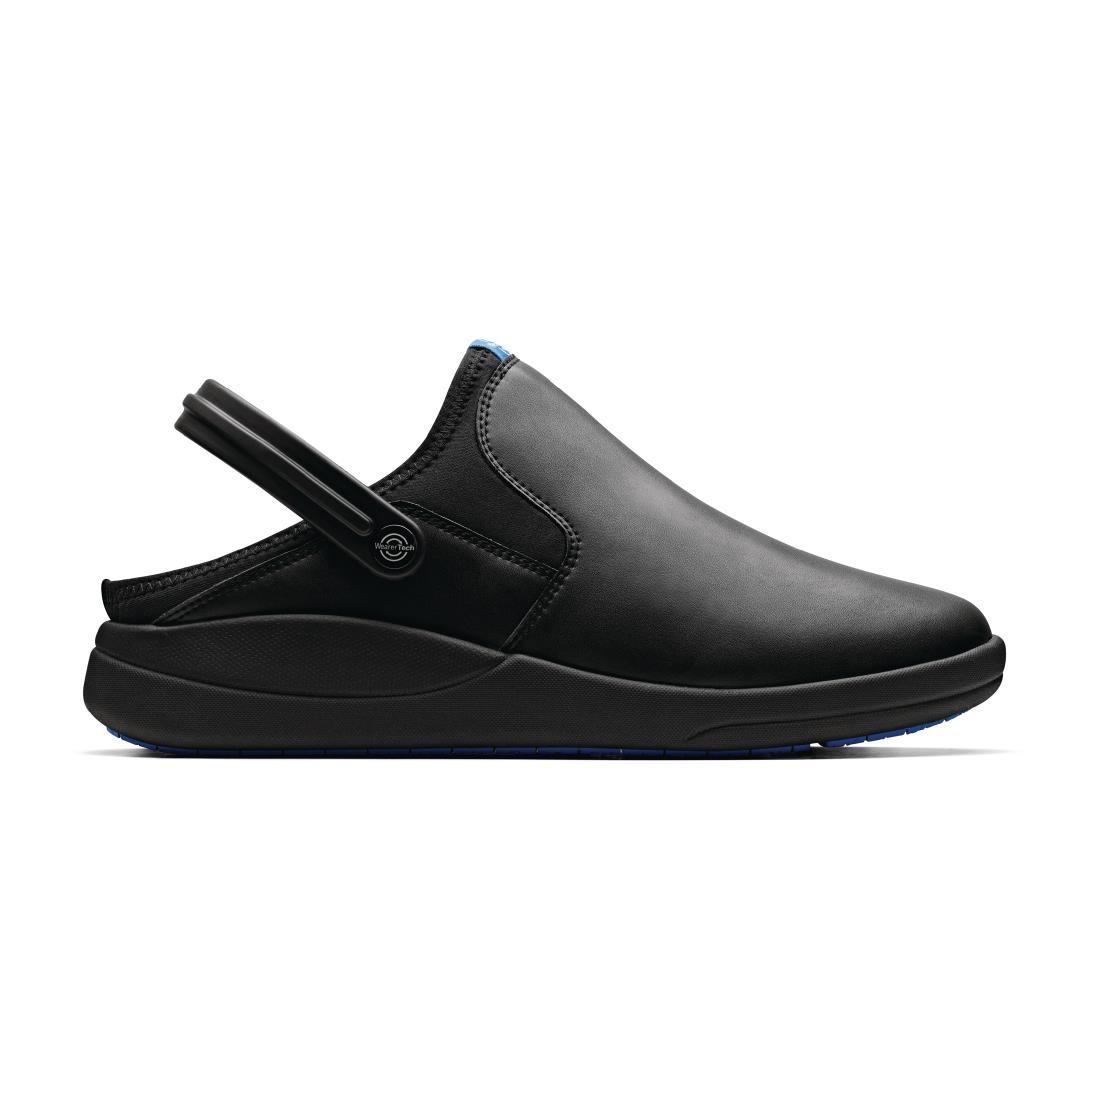 WearerTech Refresh Clog Black with Firm Insoles Size 41 - BB556-7  - 3